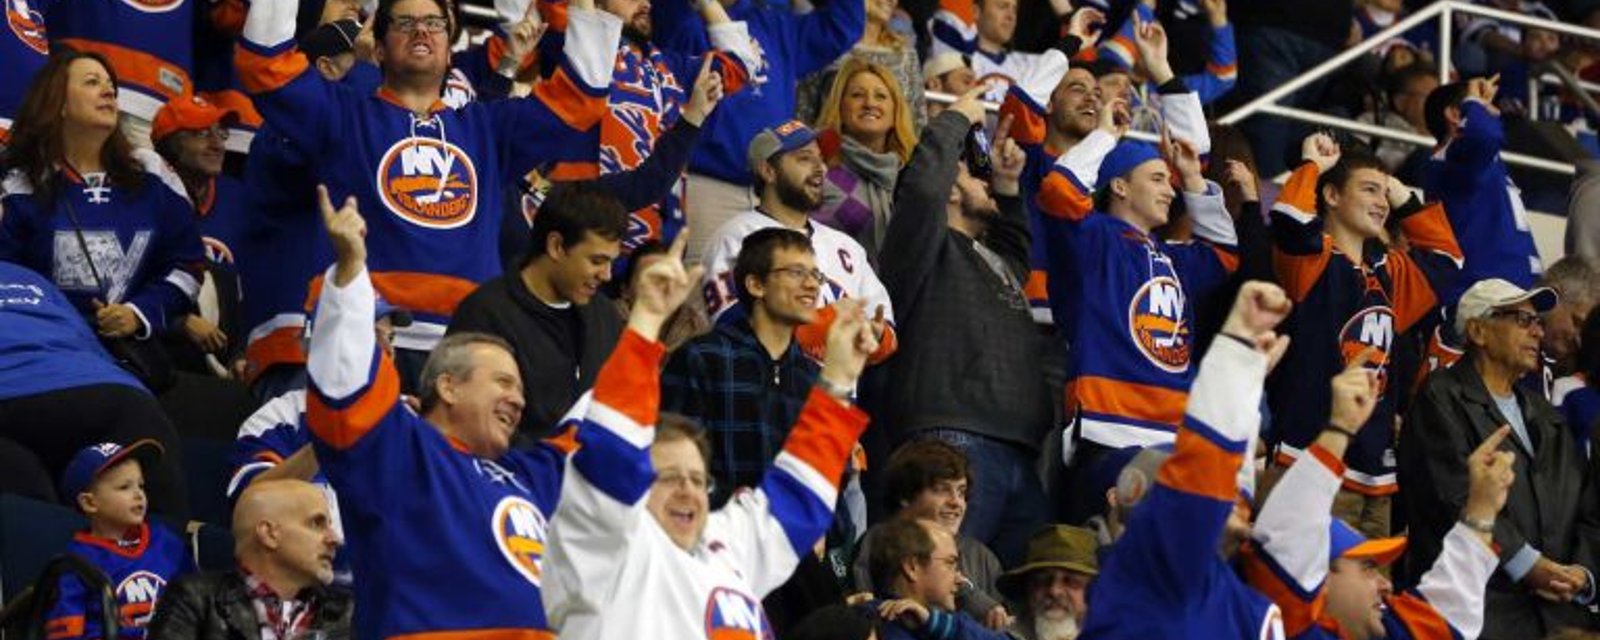 A Smirnoff Ice bottle costs more than a ticket to see an Isles game! 